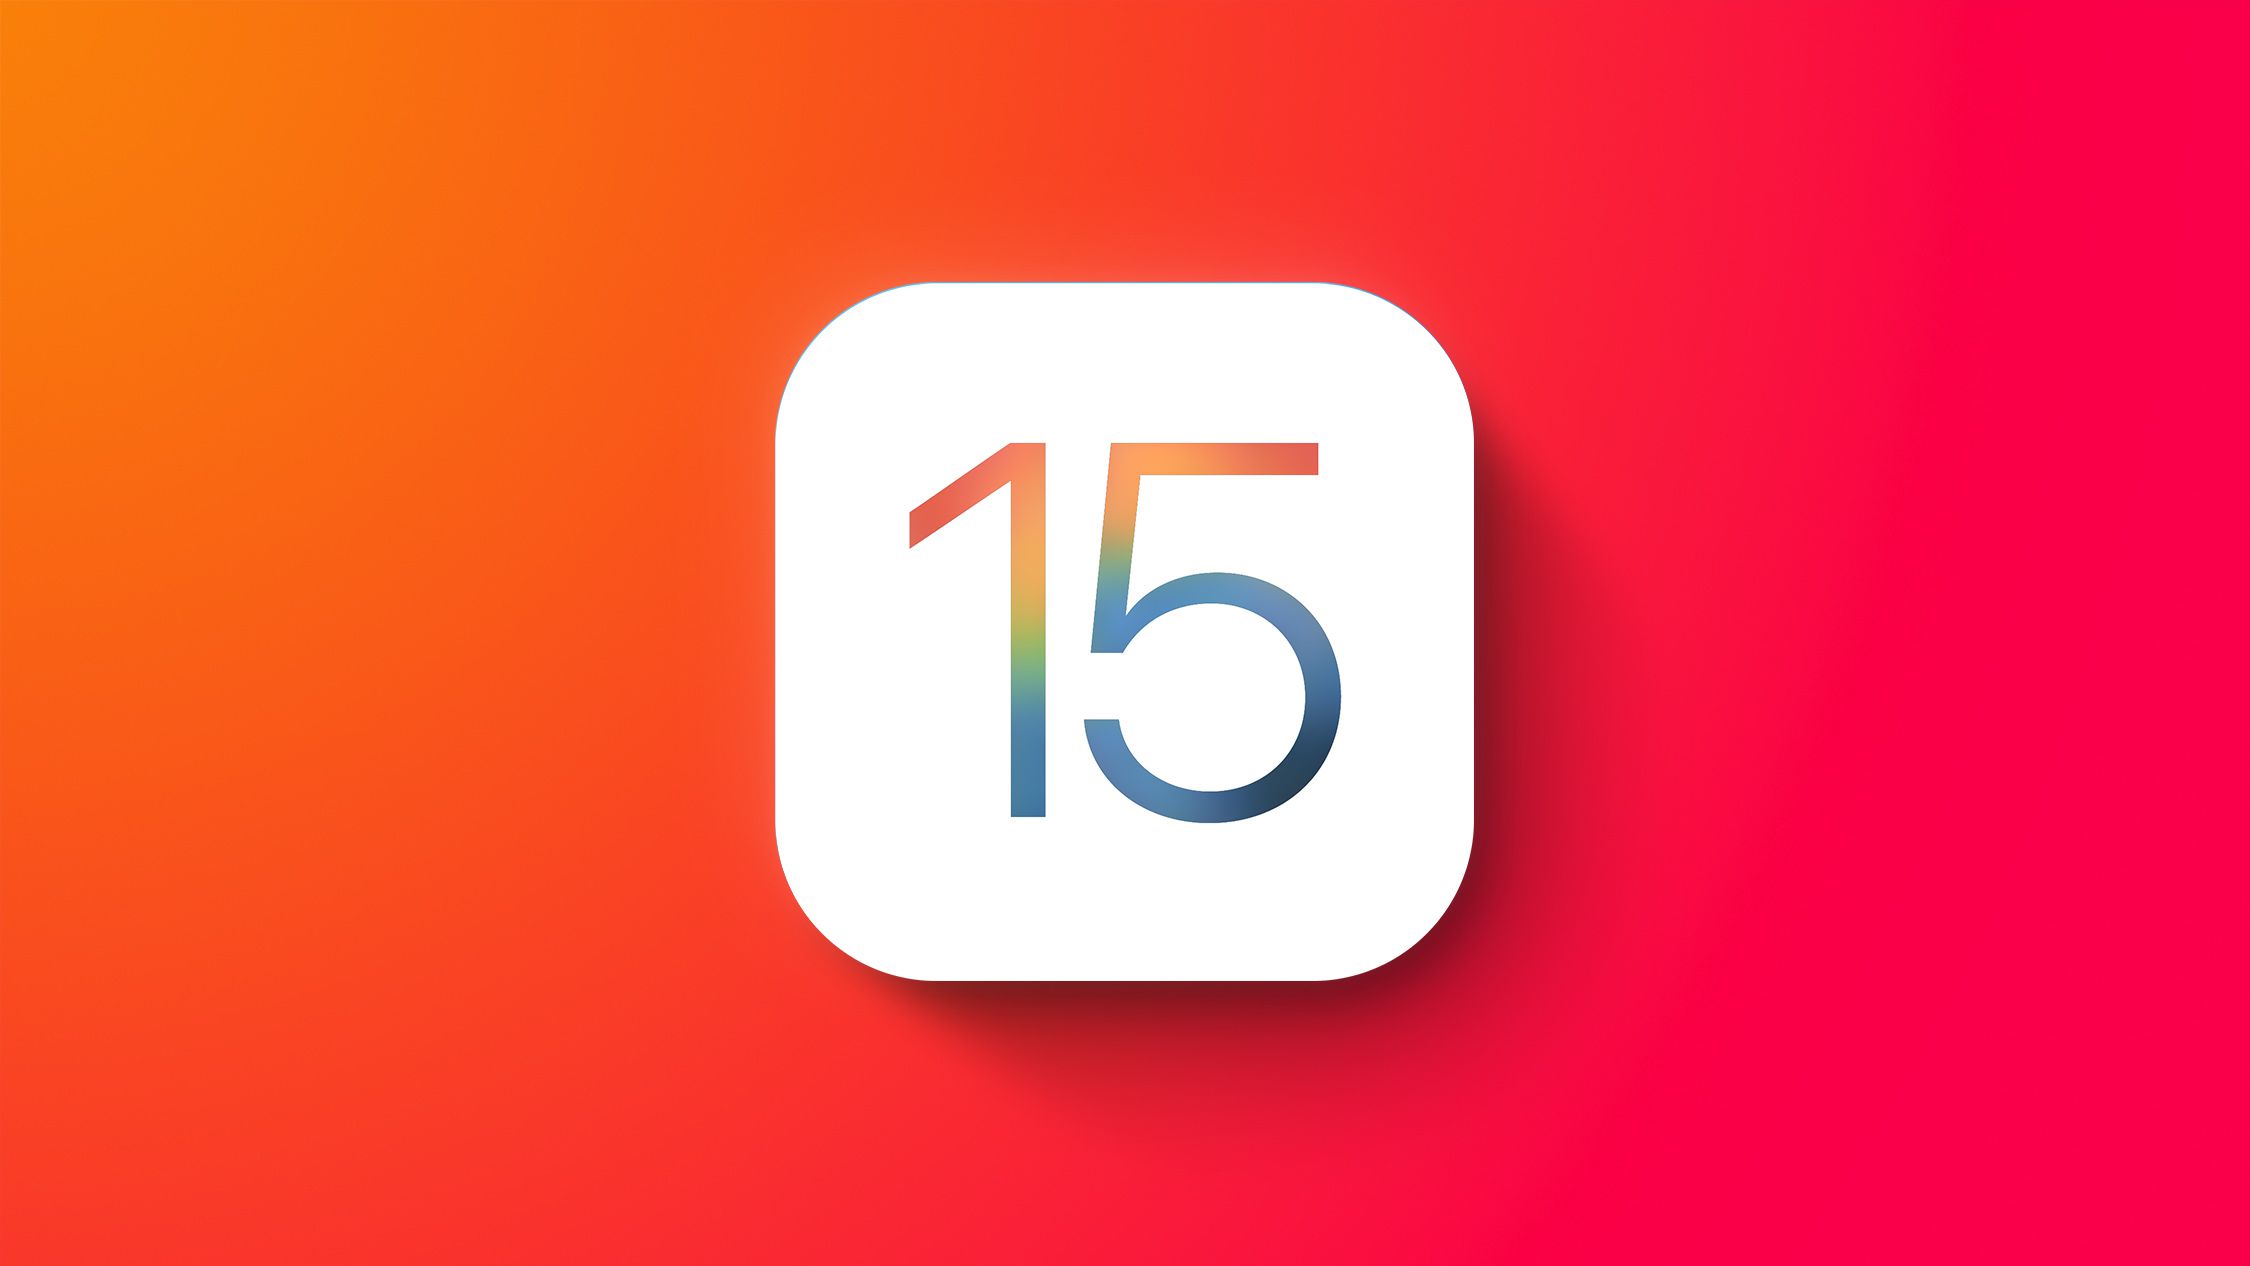 Strategies & Best Practices for iOS 15 In-App Events (Pt. 2)